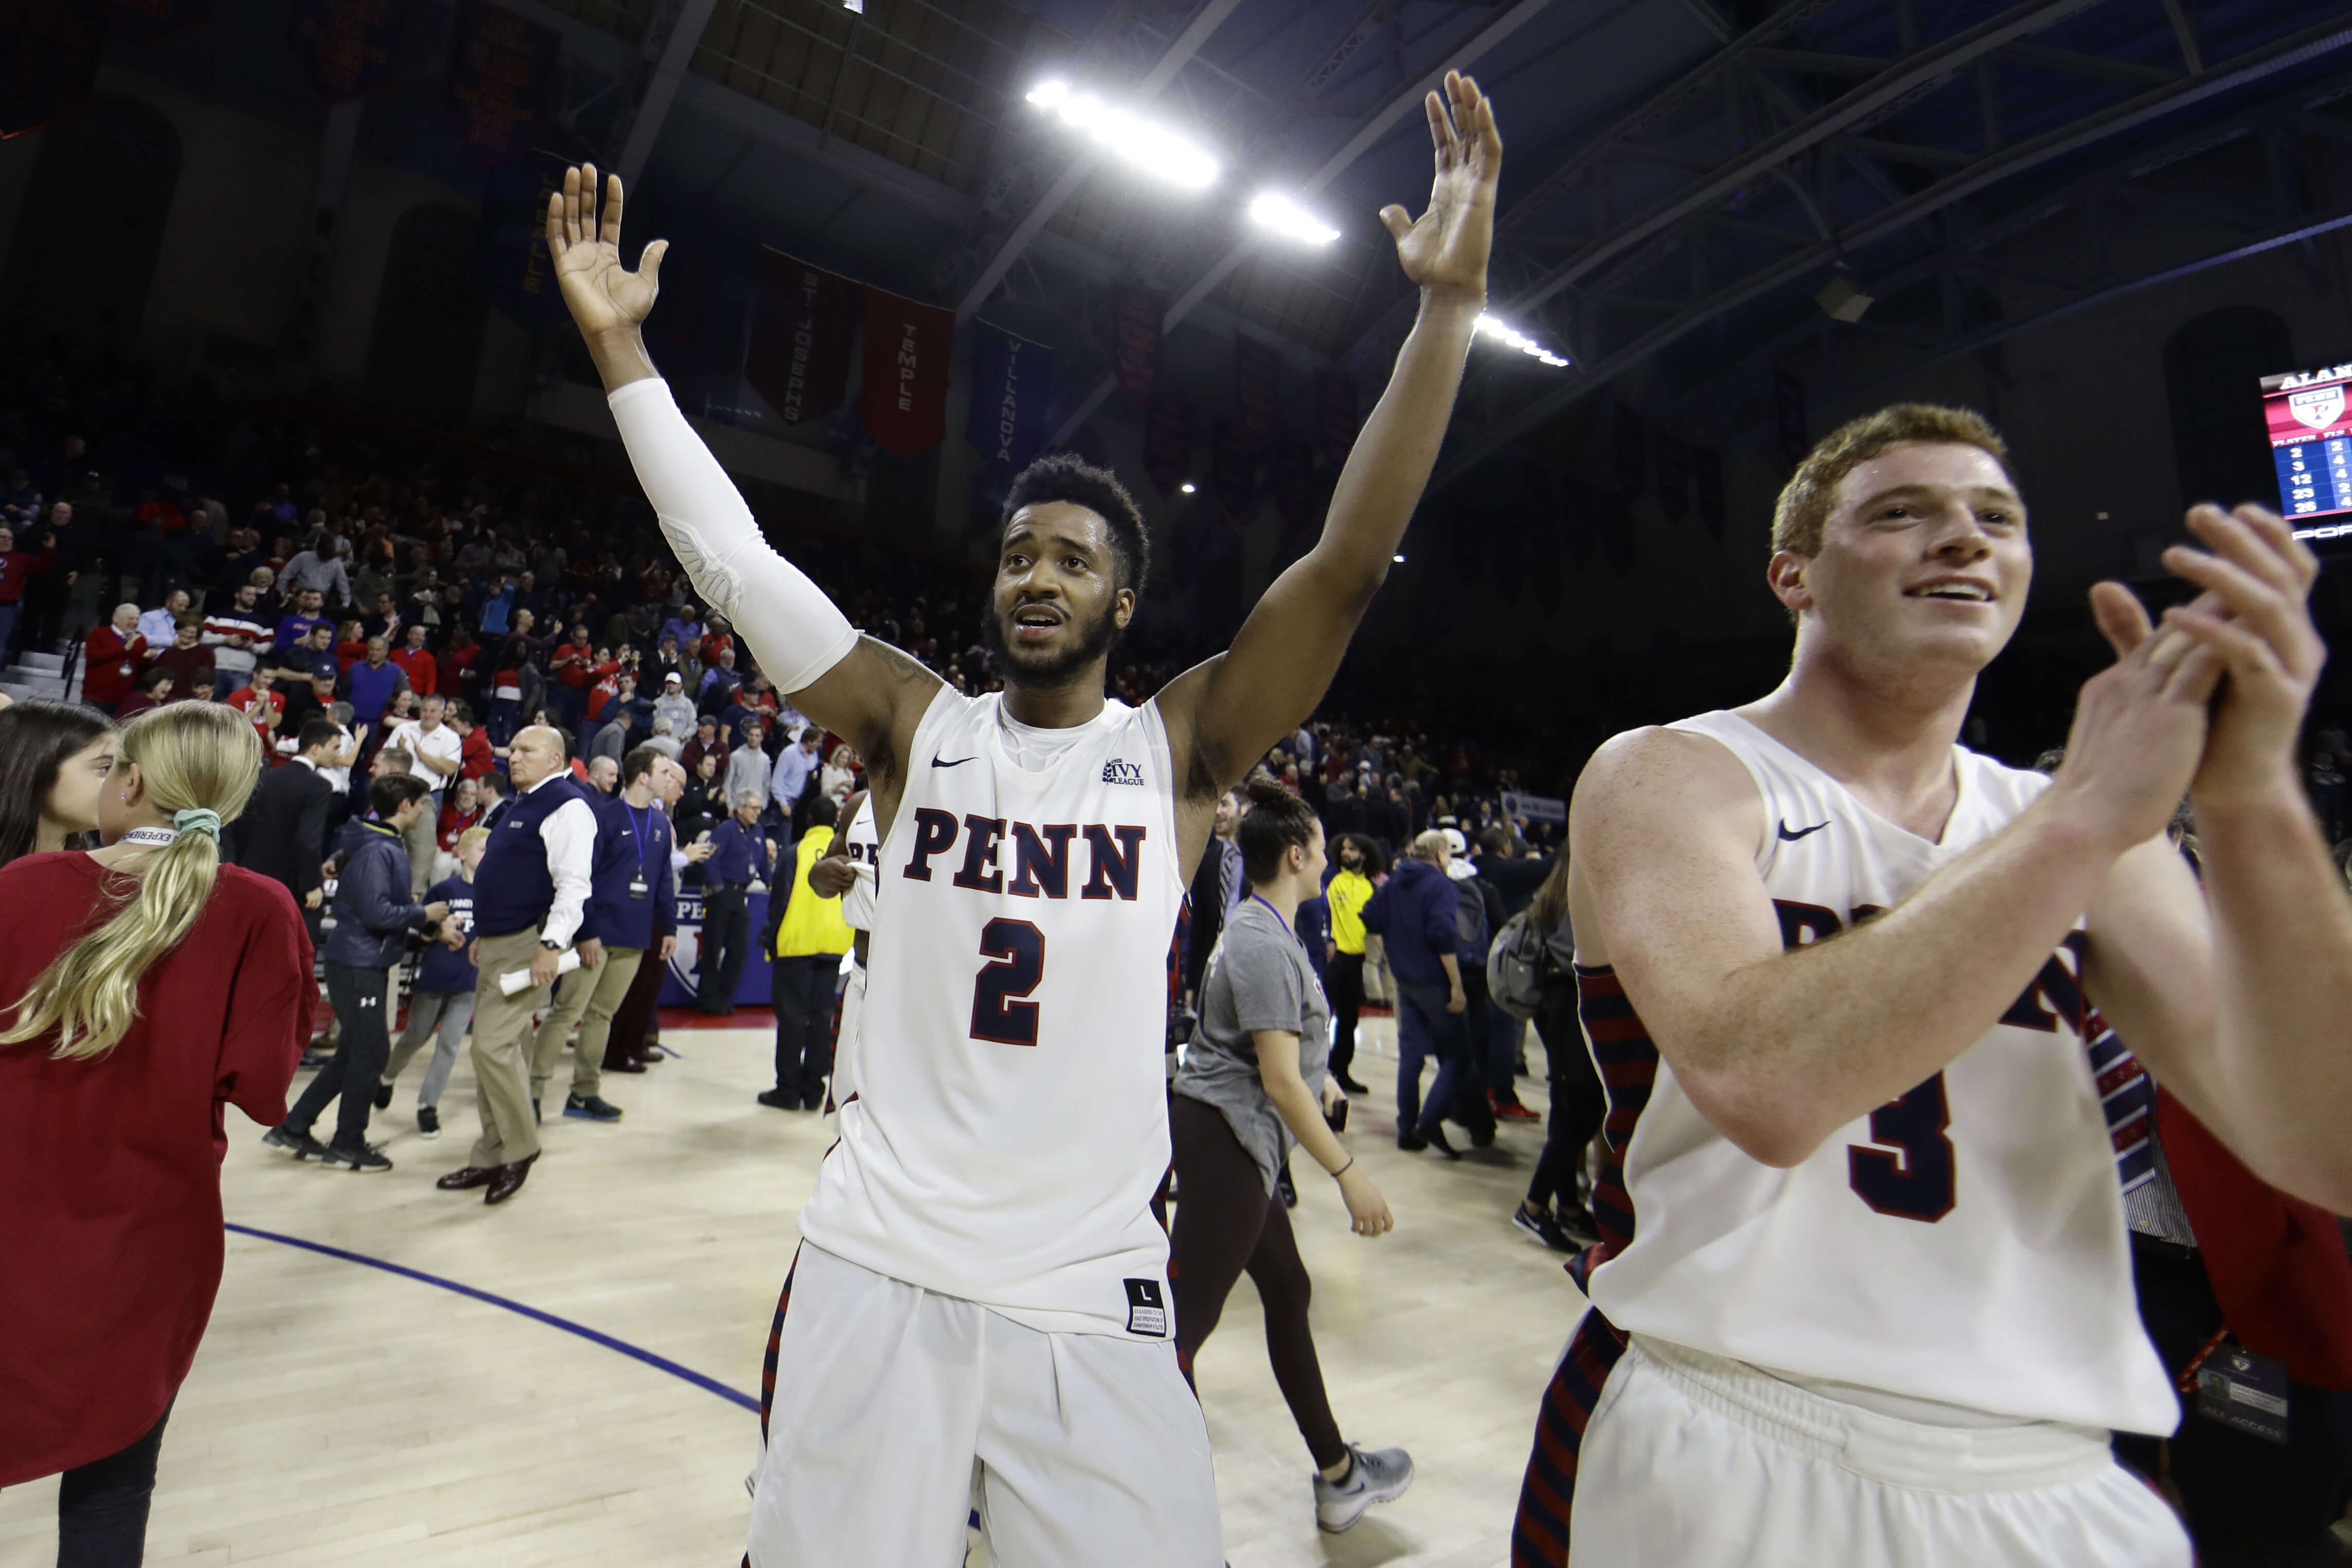 Penn's Antonio Woods (2) and Jake Silpe (3) celebrate after the Quakers beat Villanova 78-75 on Tuesday in Philadelphia.